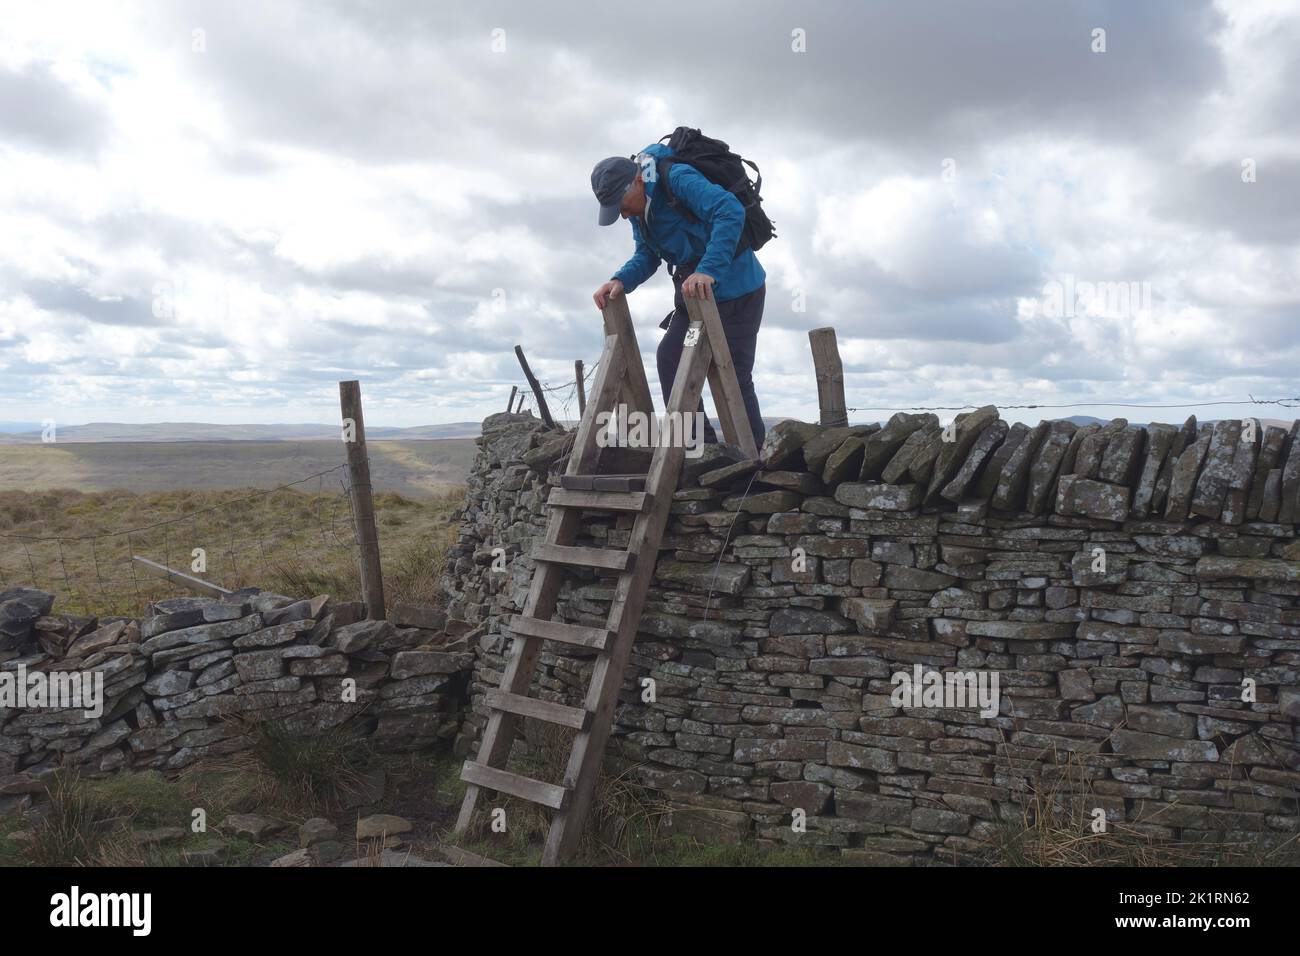 Lone Man Climbing Wooden Ladder Stile over Stone Wall near the Summit of 'Buckden Pike' in Wharfedale, Yorkshire Dales National Park, England, UK. Stock Photo